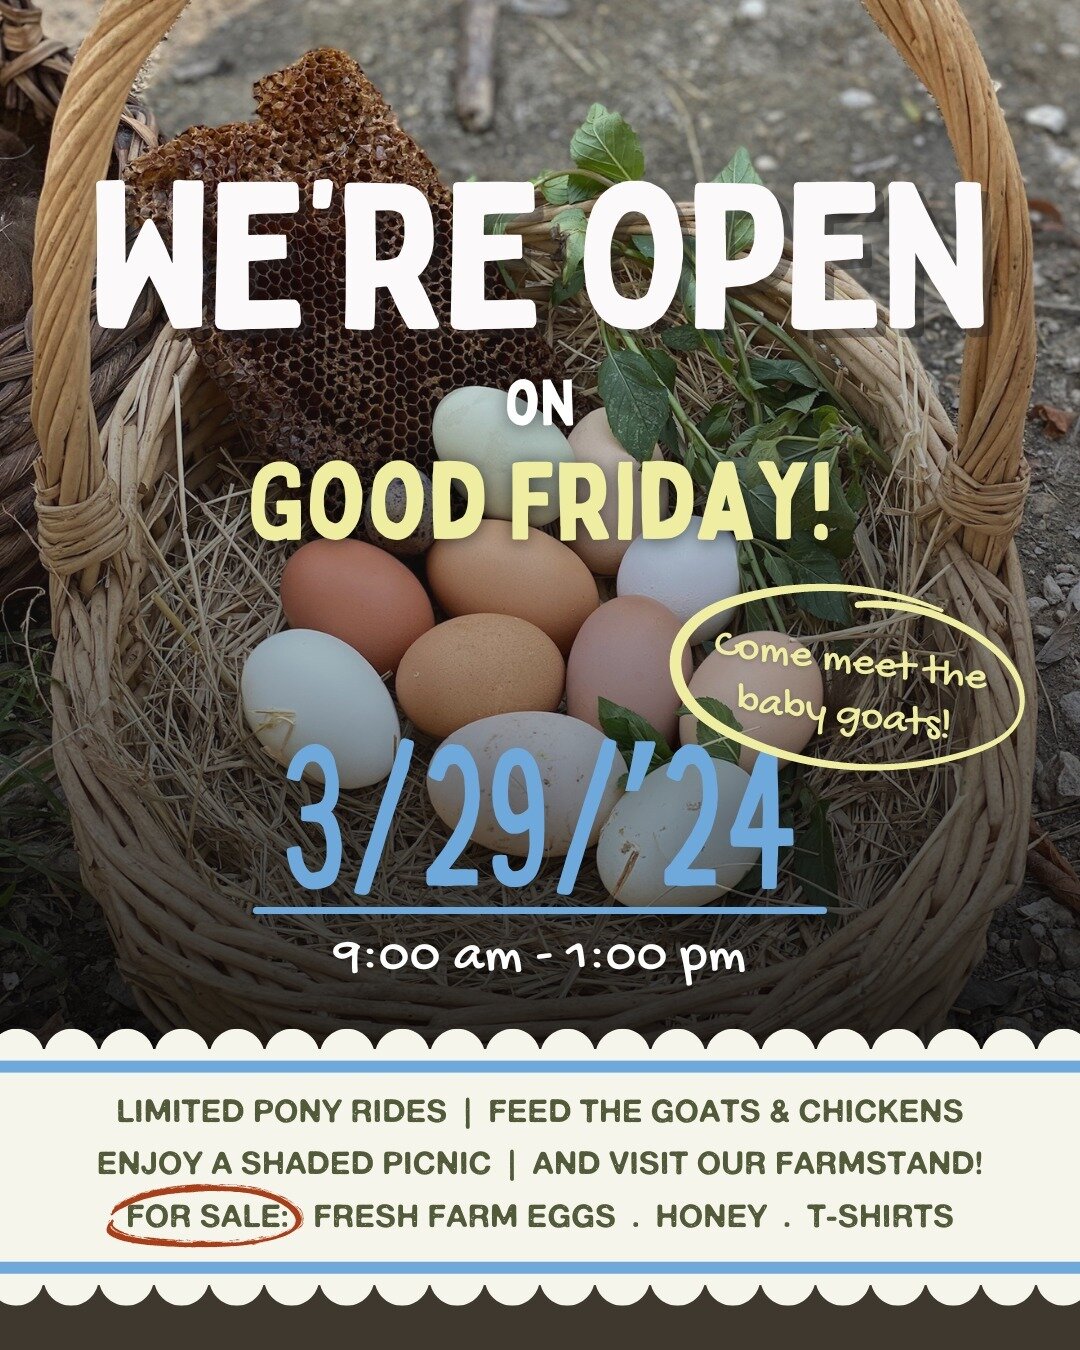 We are OPEN this Friday, 3/29! Join us between 9 a.m. and 1 p.m. for a family-friendly day on the farm. Limited Pony Rides and Animal Feed Cups will be available for purchase upon arrival. See you there, friends!

ATTENTION: Sugar Roots Farm will be 